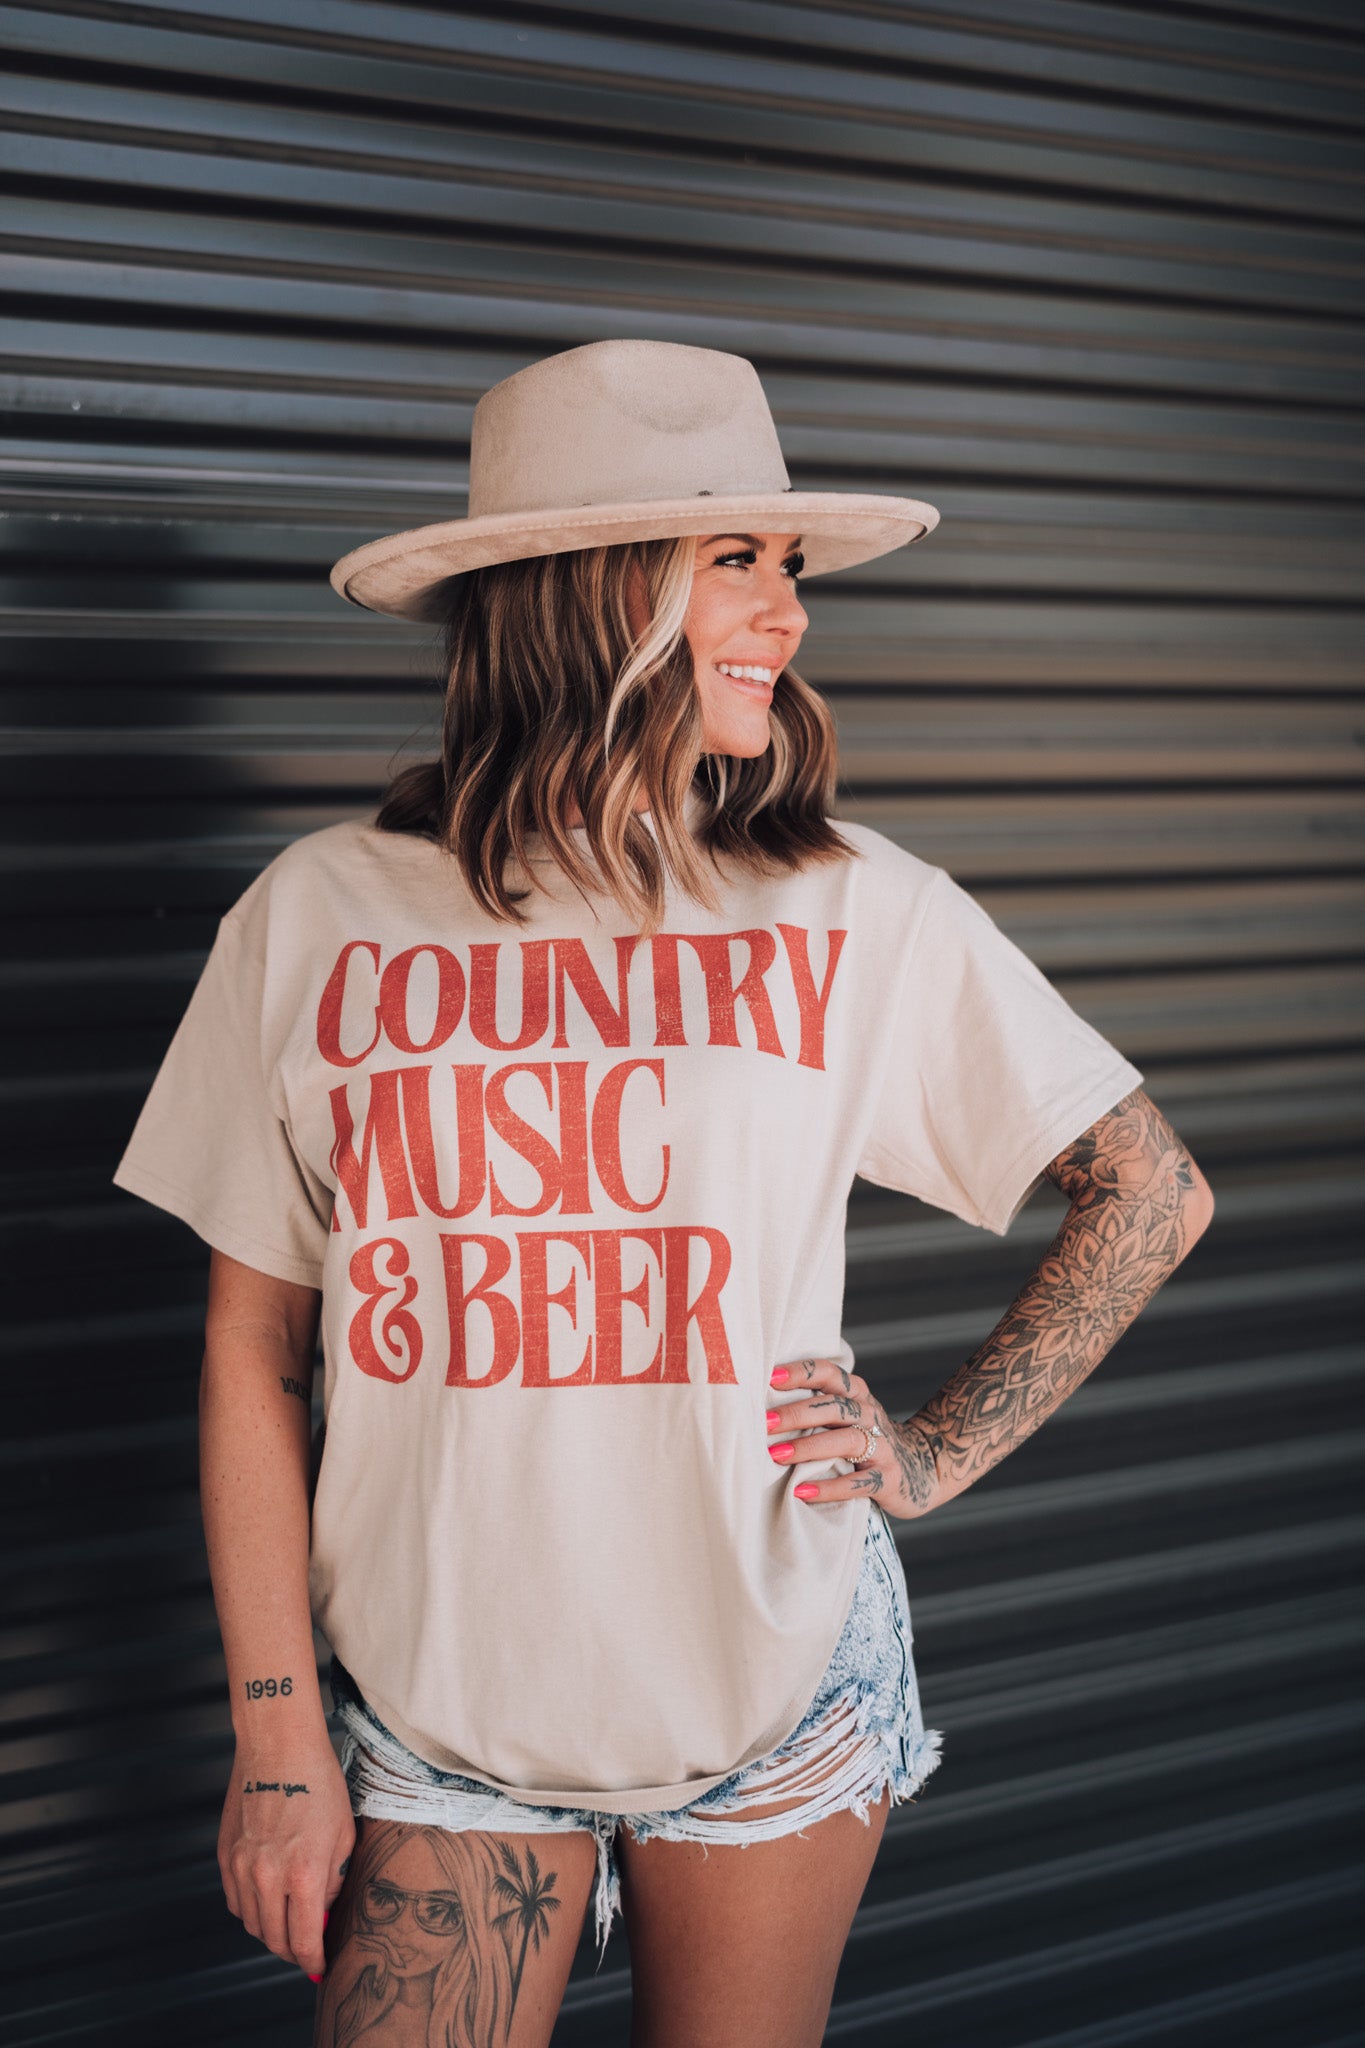 PRE-ORDER Country Music And Beer Oversized Tee Ships May 28th